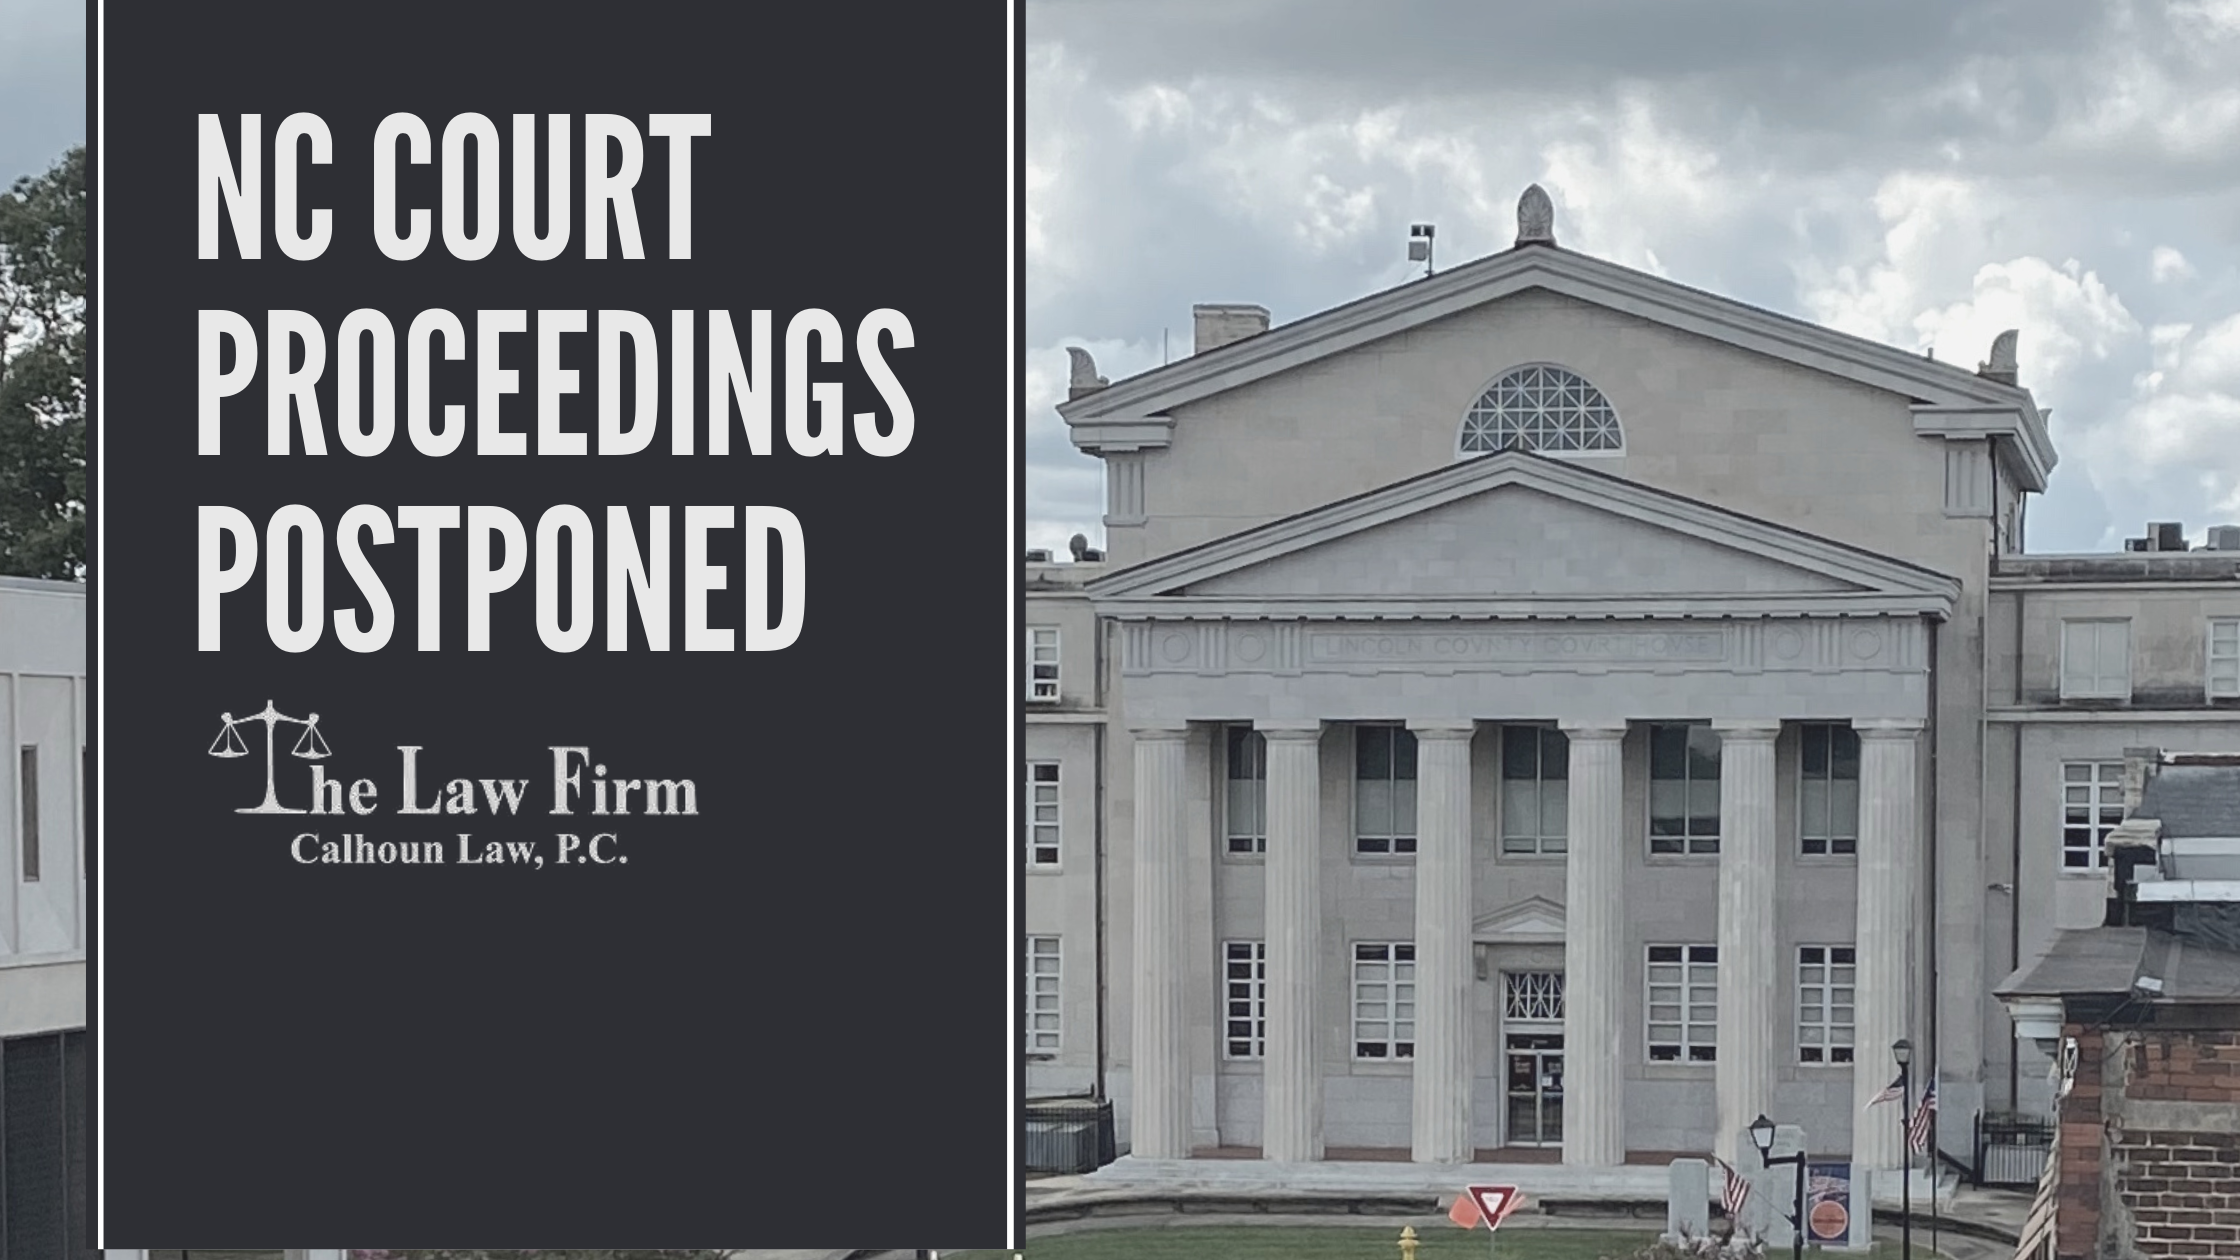 Lincoln County Court Proceedings Postponed - The Law Firm in Lincolnton